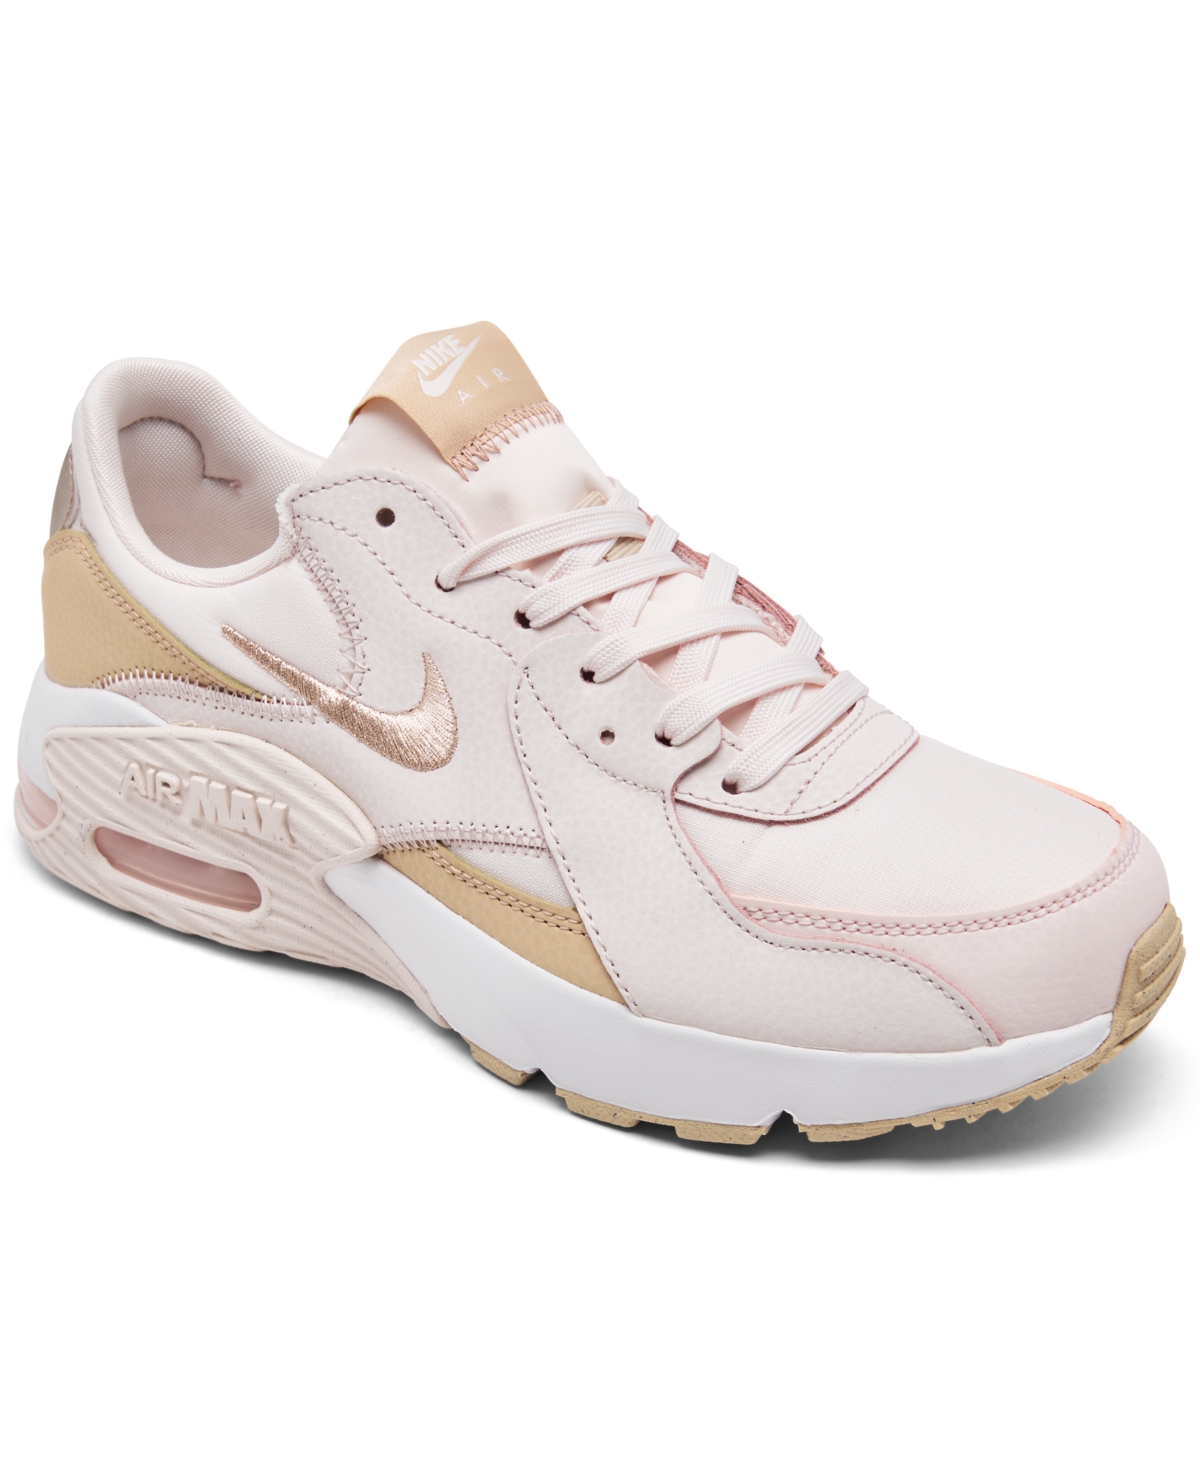 Women's Air Max Excee Casual Sneakers from Finish Line - Light Pink, Shimmer